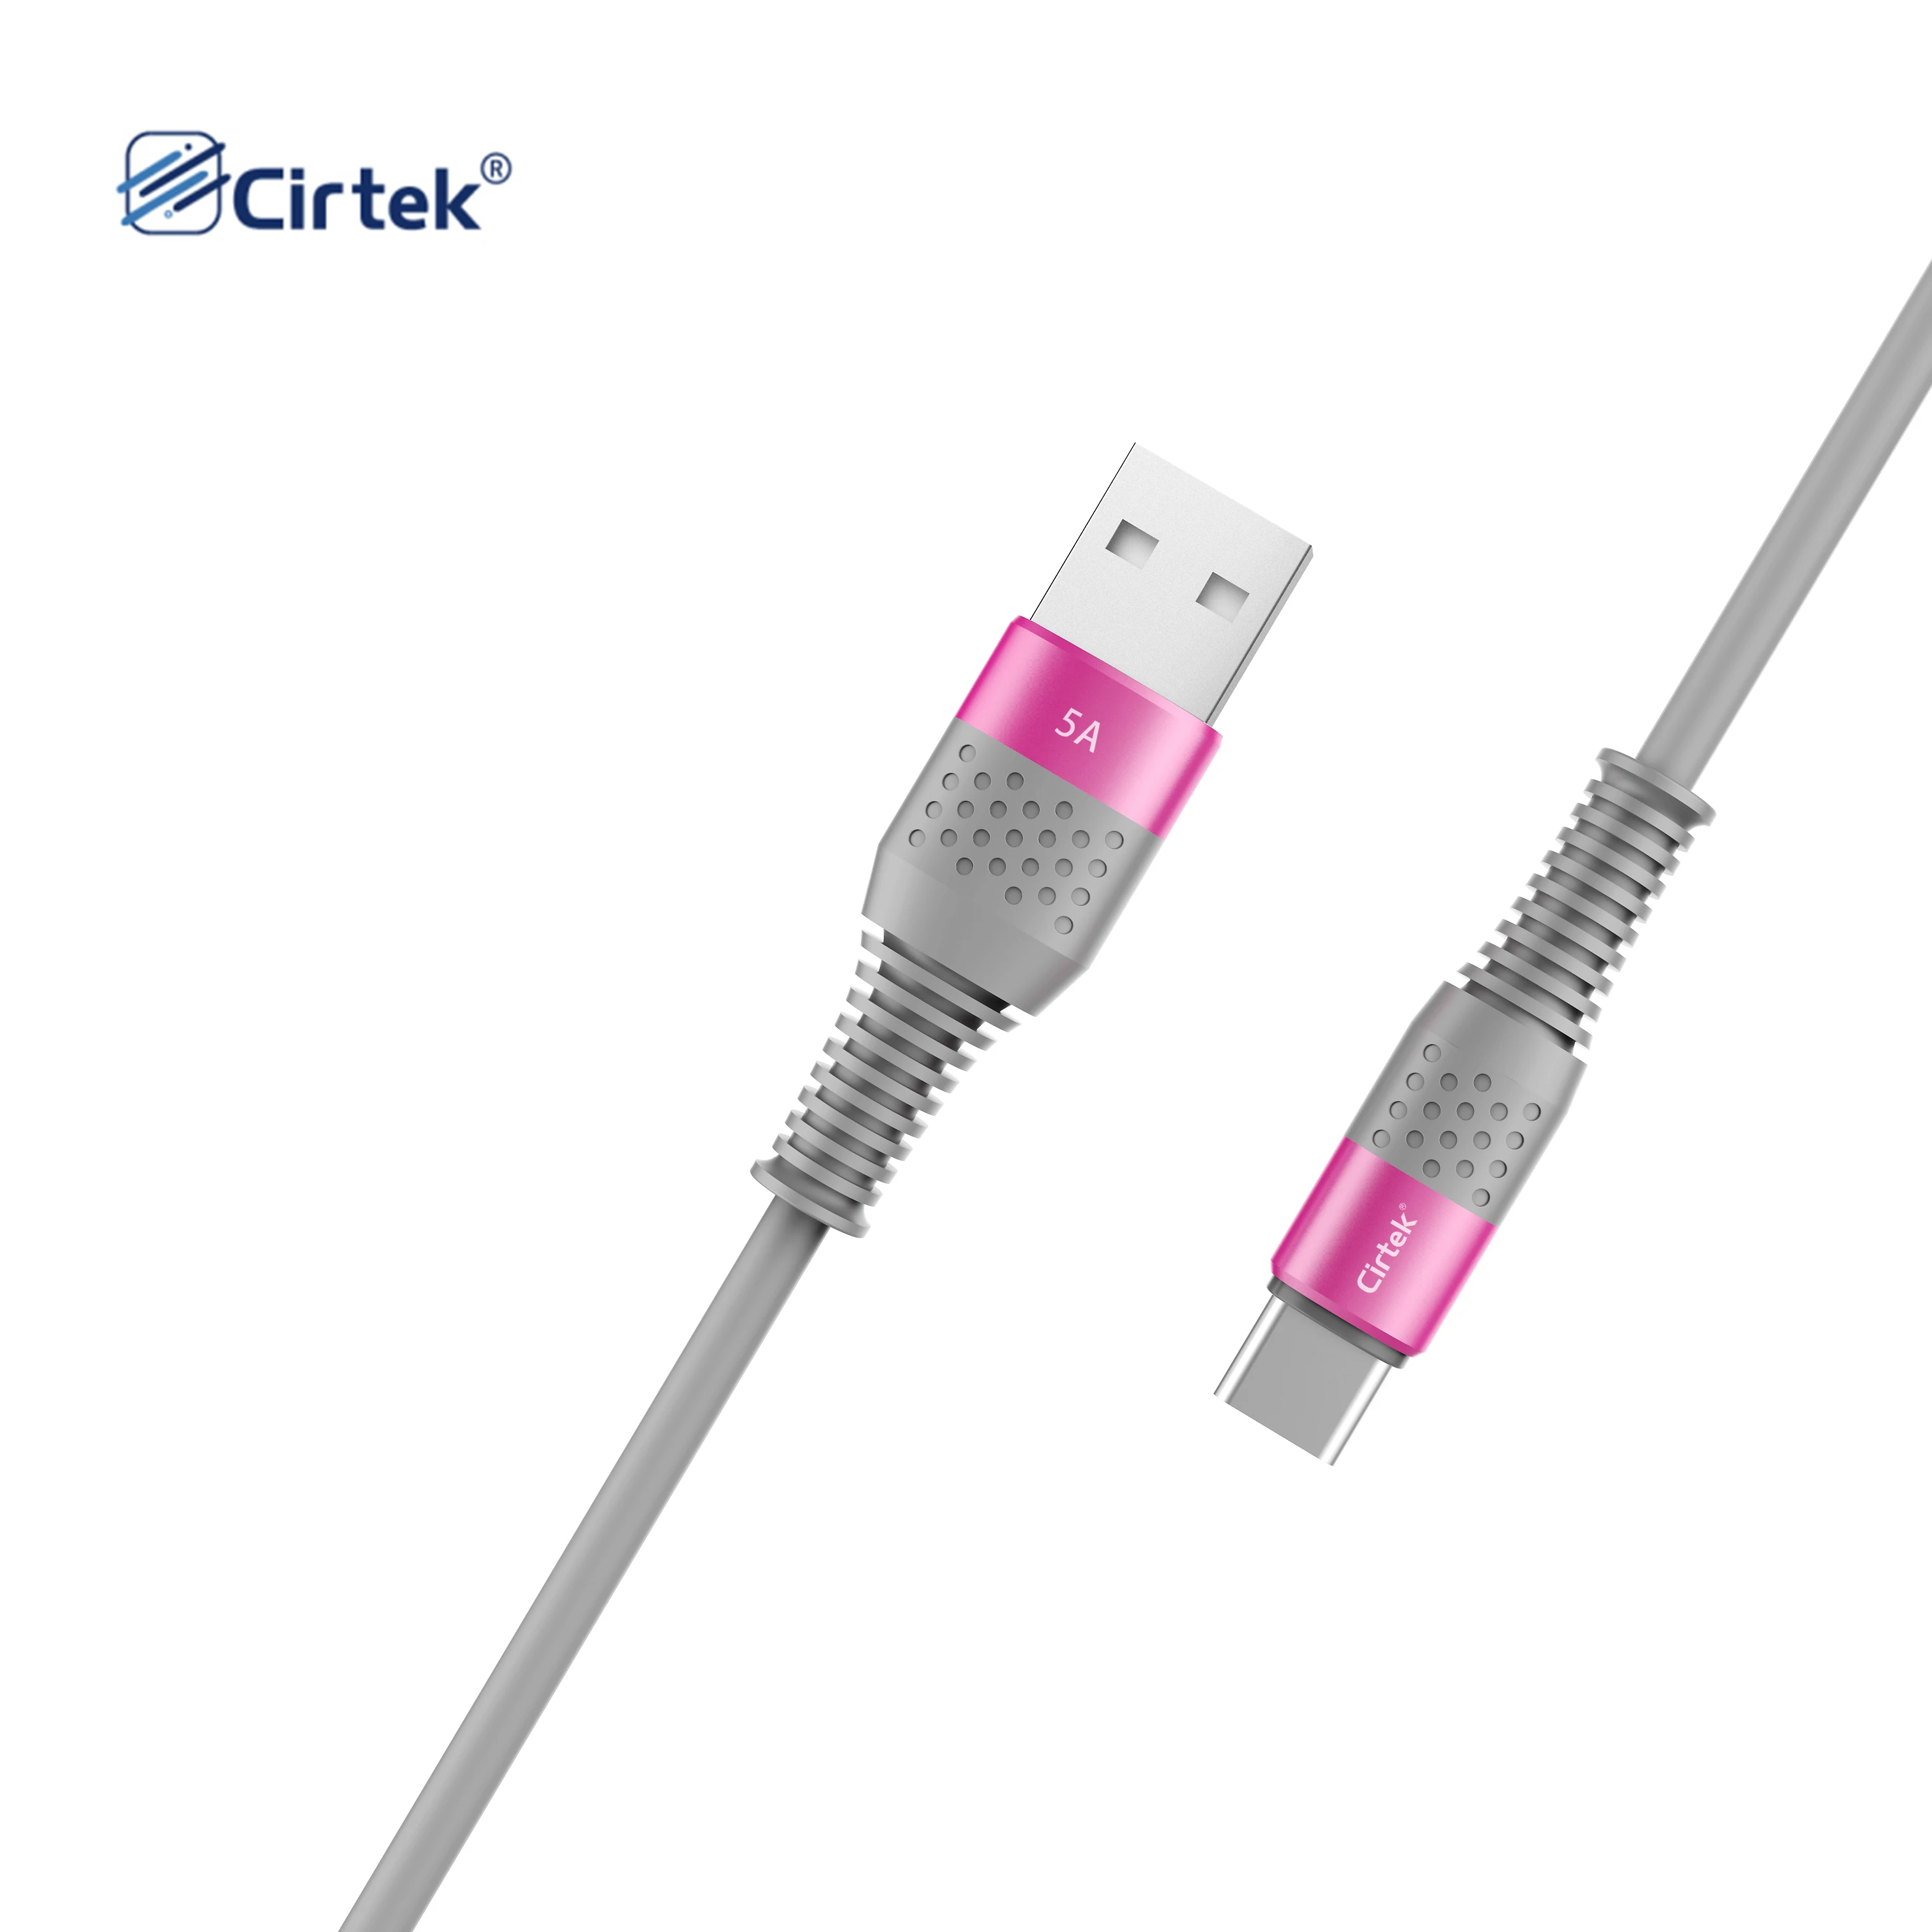 

Cirtek china factory price1m 5A silicon usb to usb c charger cable wire types custom usb c fast data charging cable cord